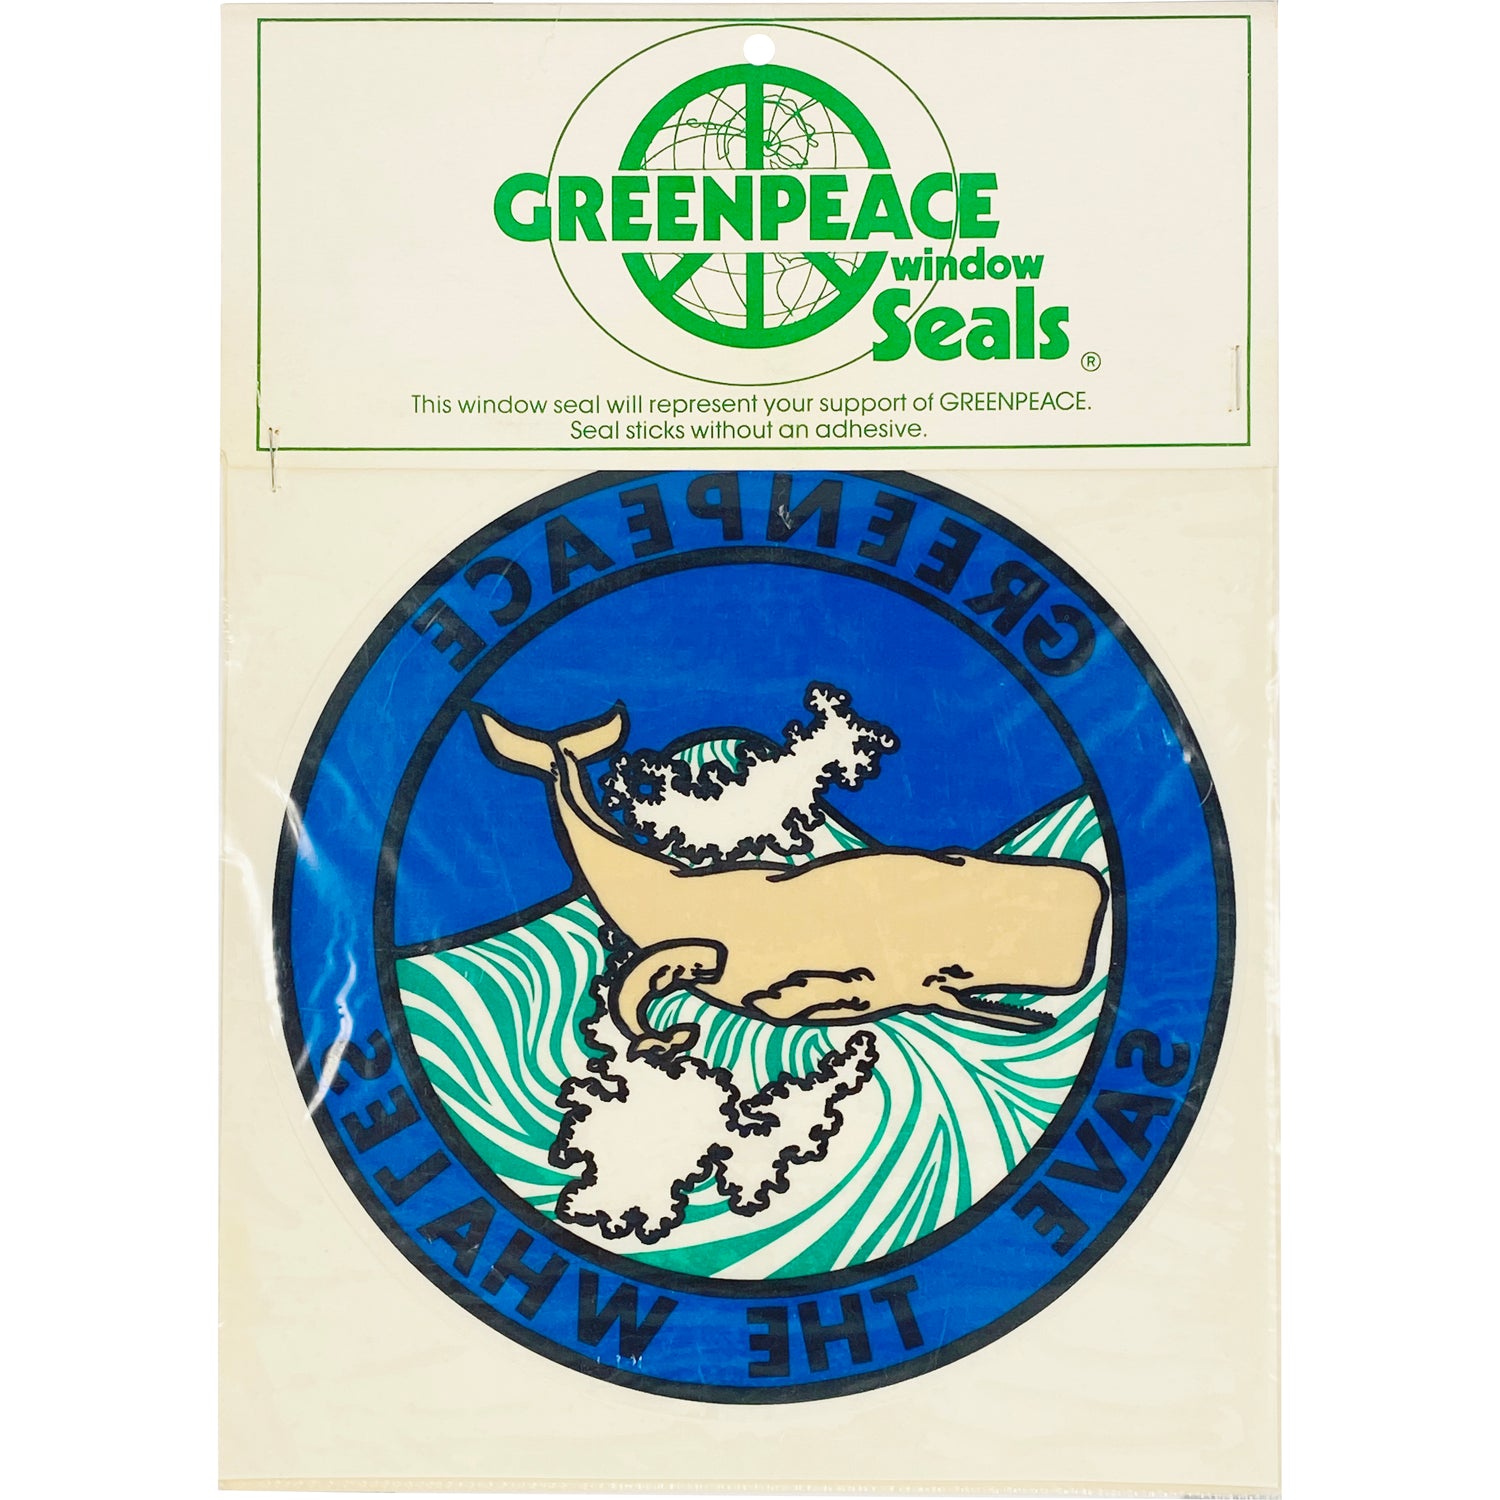 VINTAGE GREENPEACE SAVE THE WHALES WINDOW SEAL